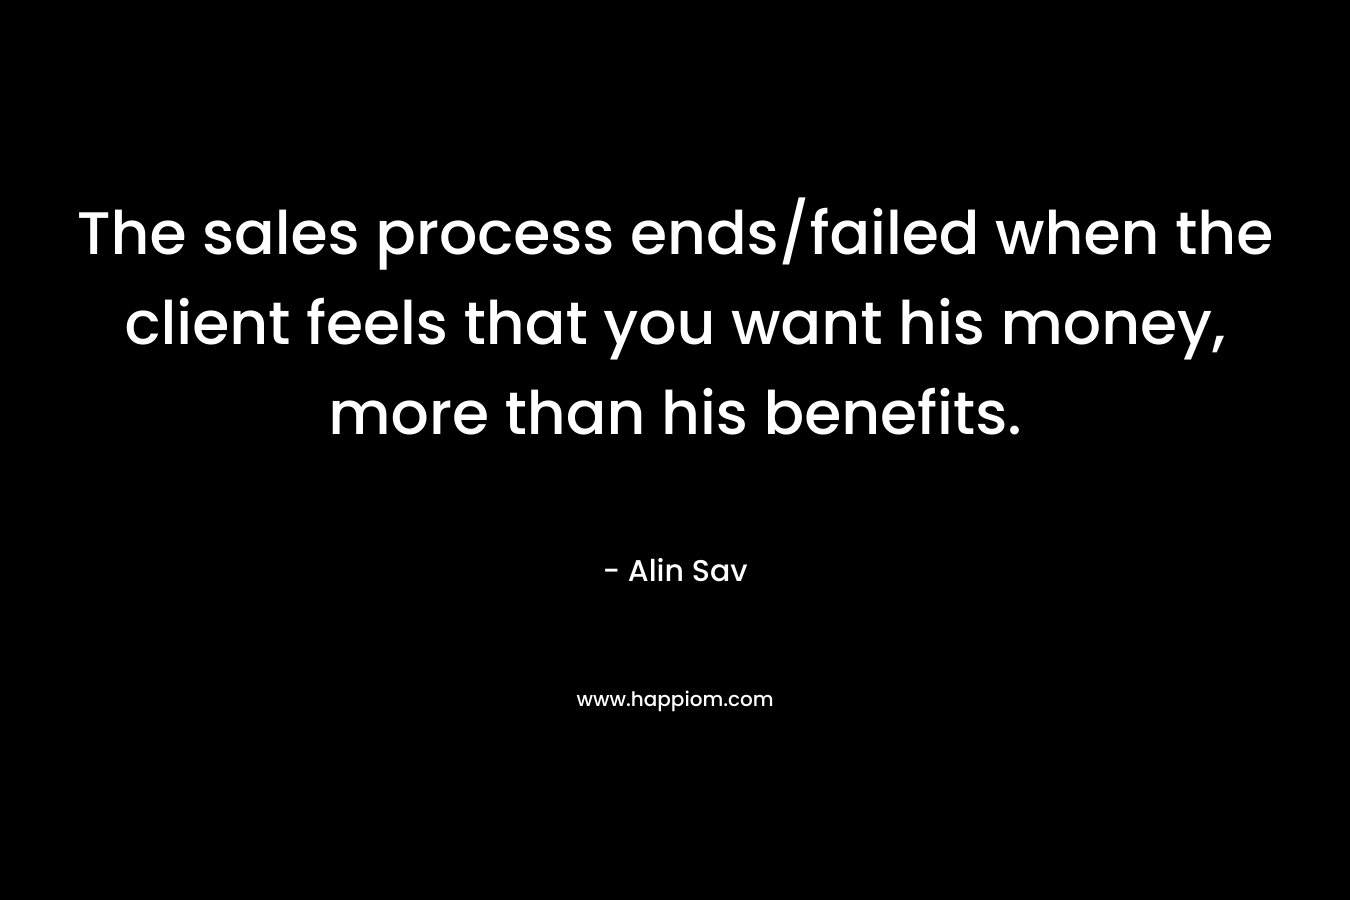 The sales process ends/failed when the client feels that you want his money, more than his benefits. – Alin Sav